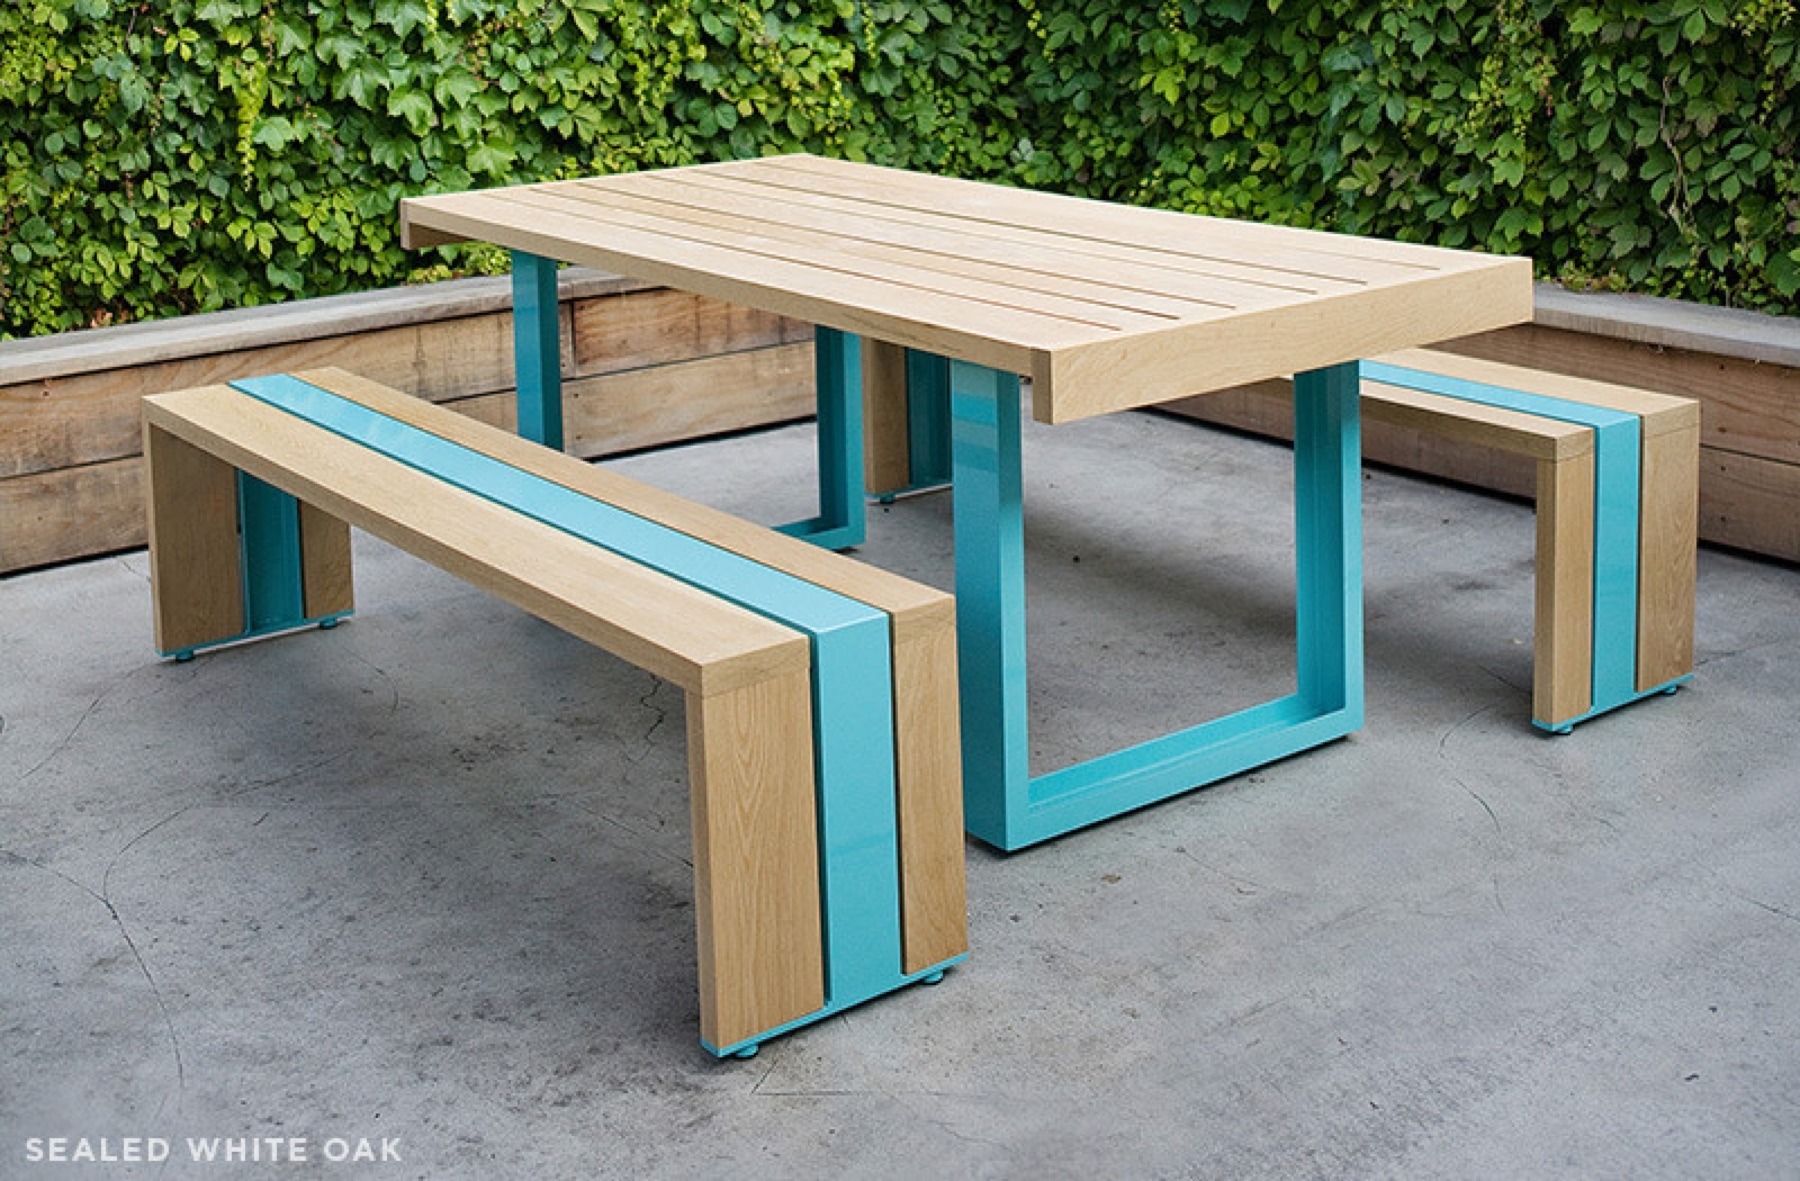 The SR Outdoor Table Set in American white oak and powder-coated aluminum from Scout Regalia. Photograph by Dylan + Jeni.